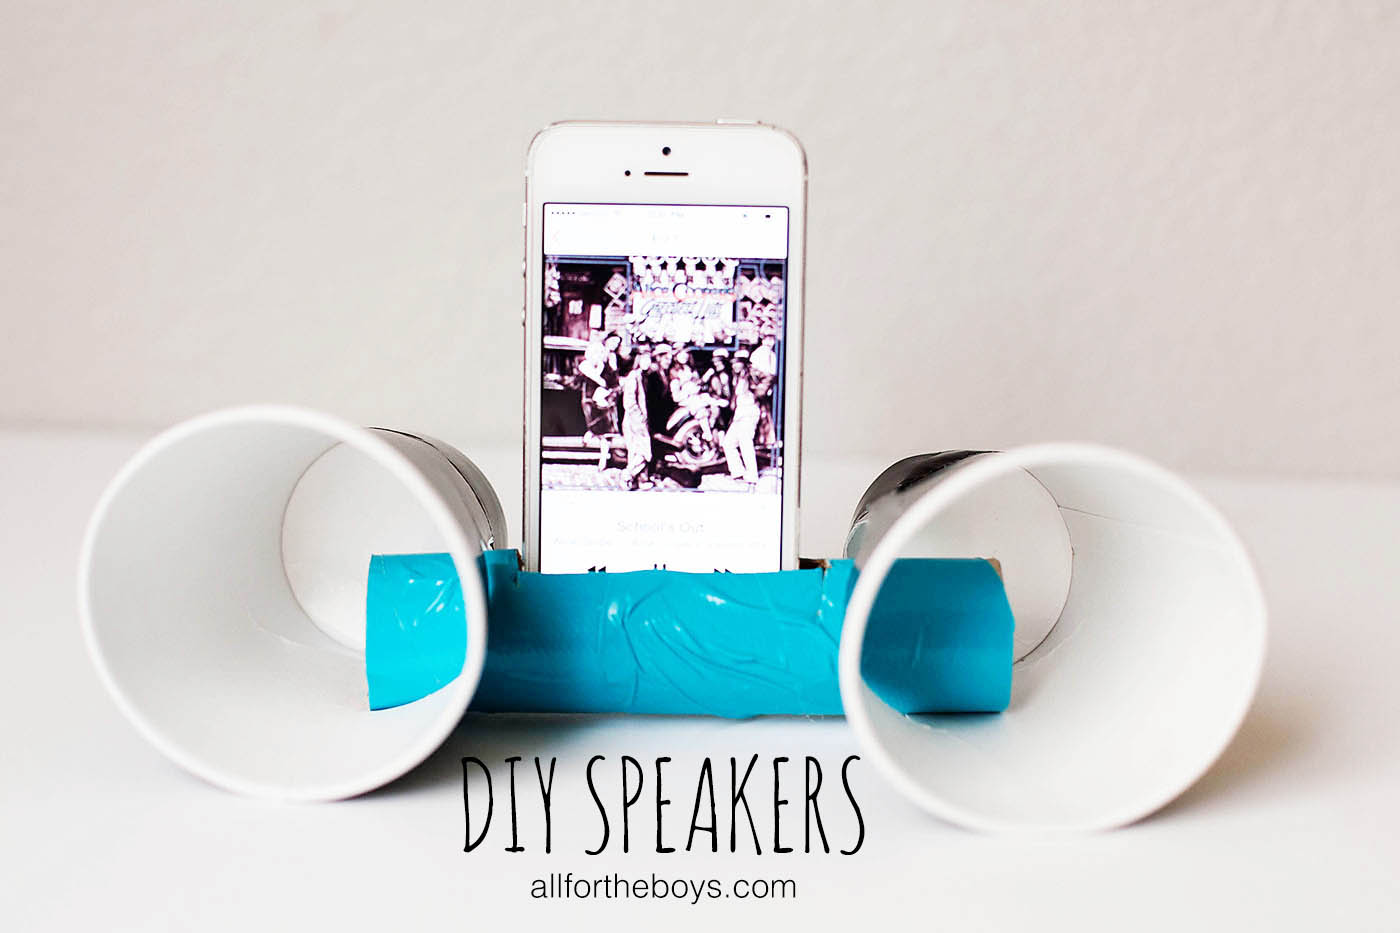 DIY speakers from All for the Boys blog